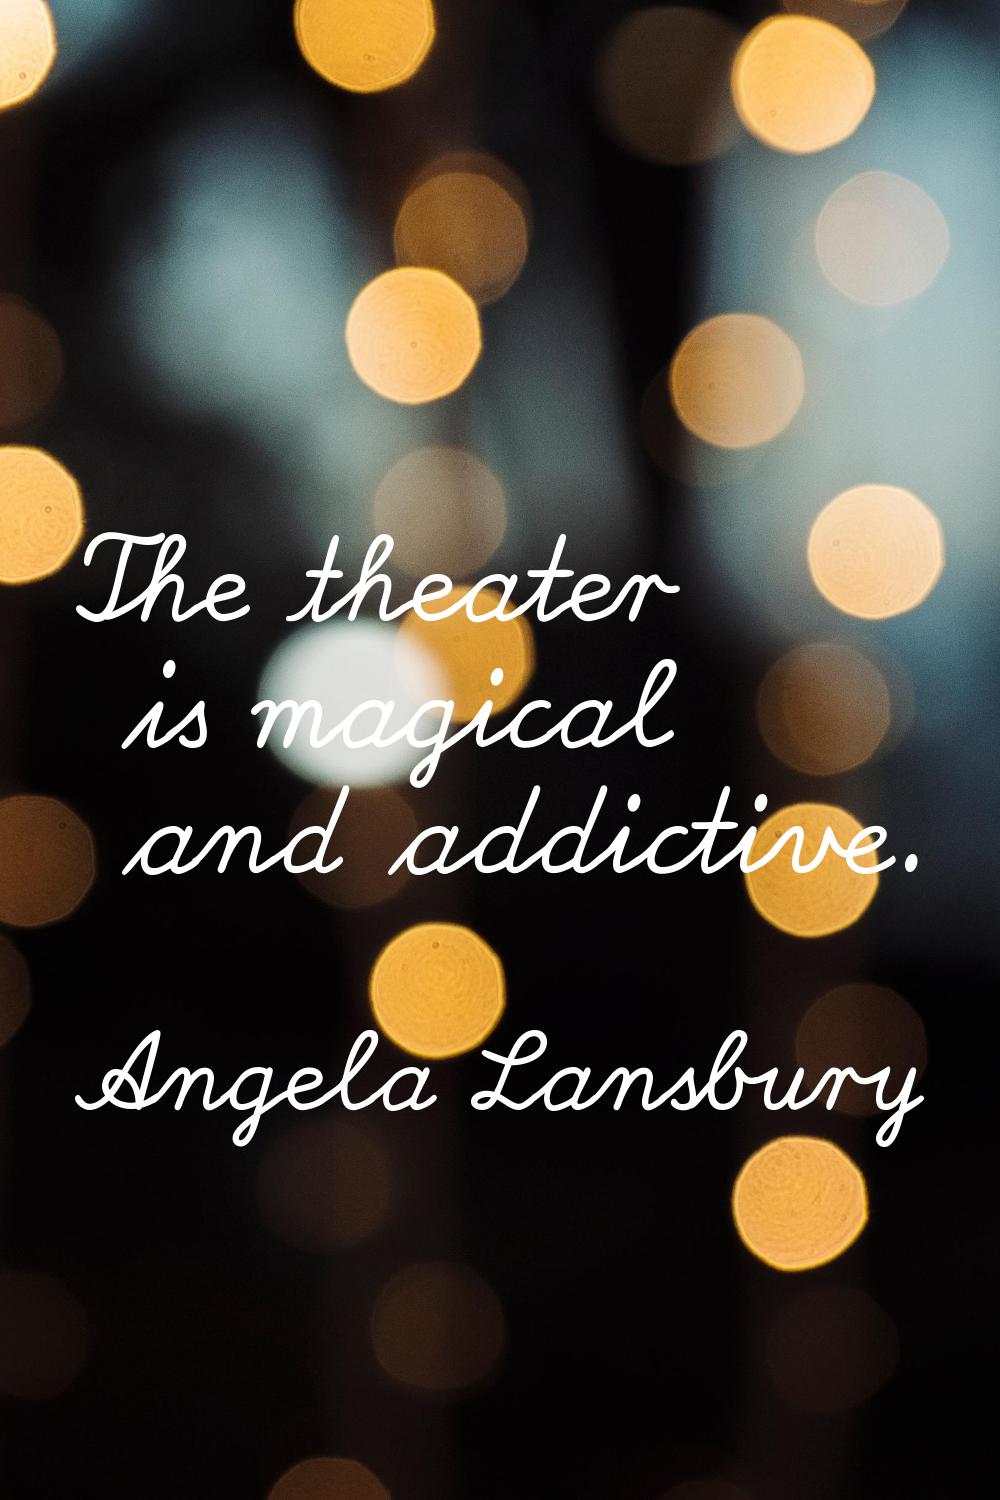 The theater is magical and addictive.